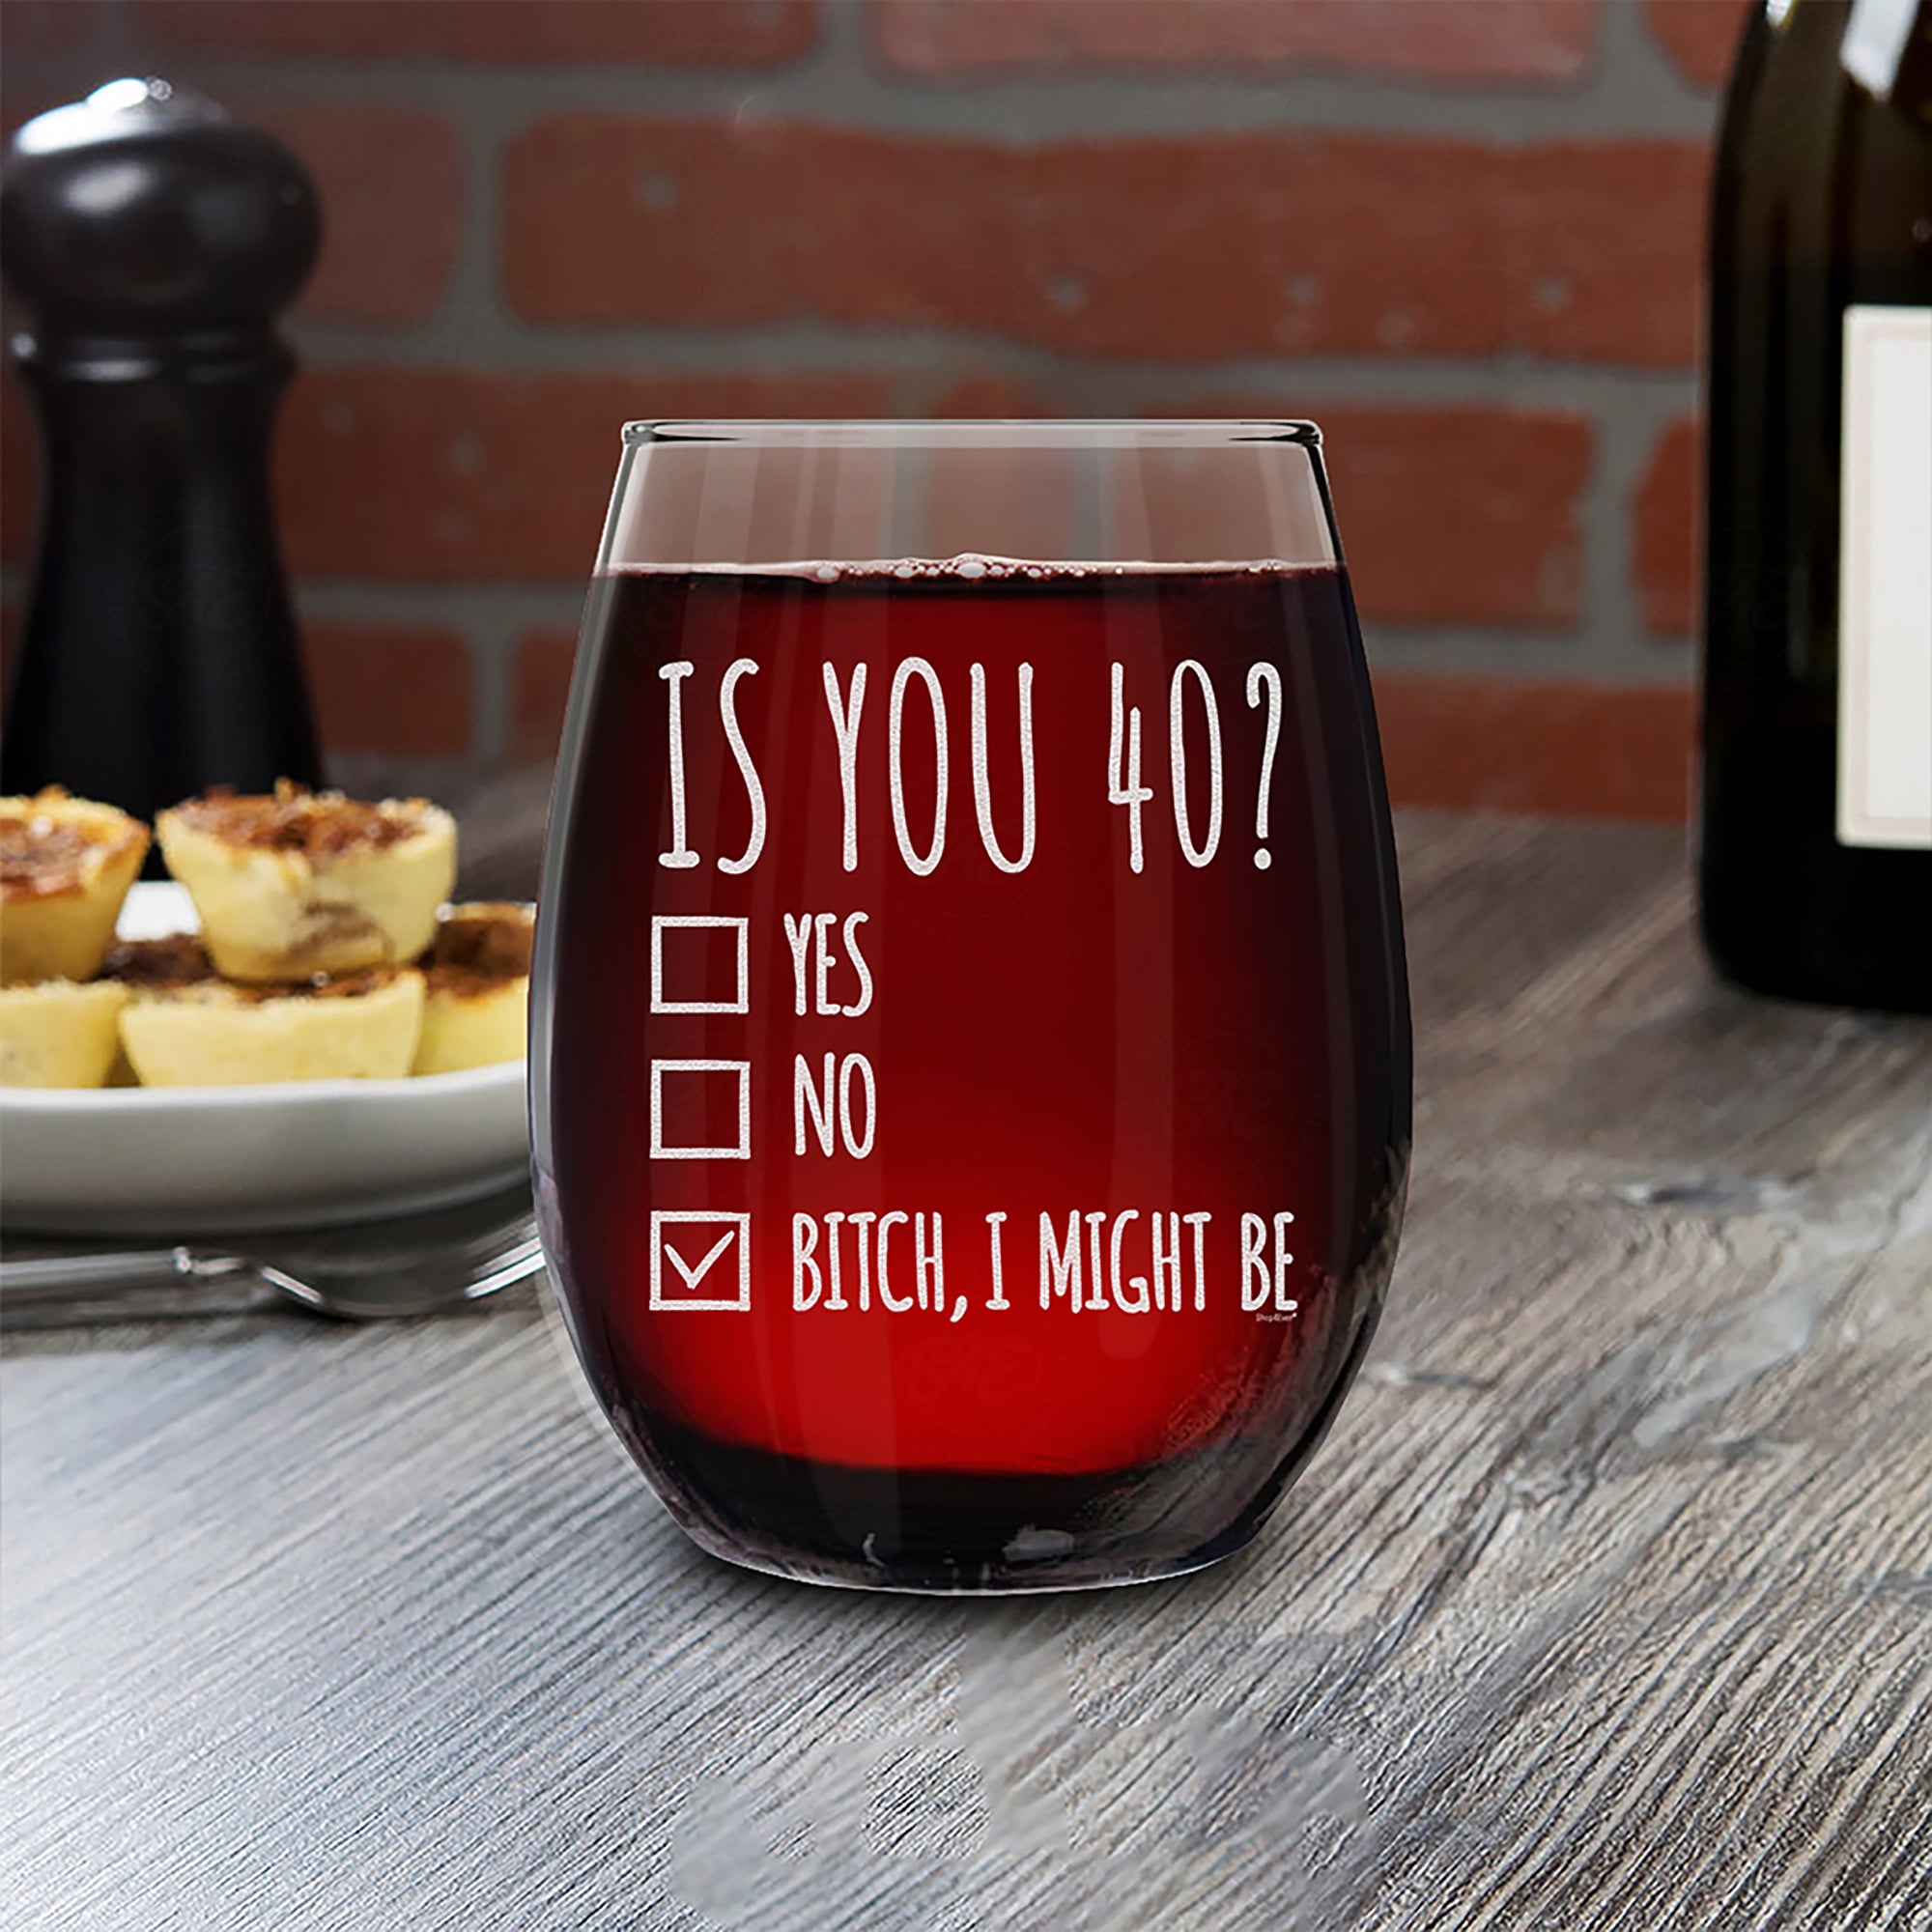 40th Birthday Wine Glass Gift for Women Is You 40? Yes No Engraved Stemless Wine Glass